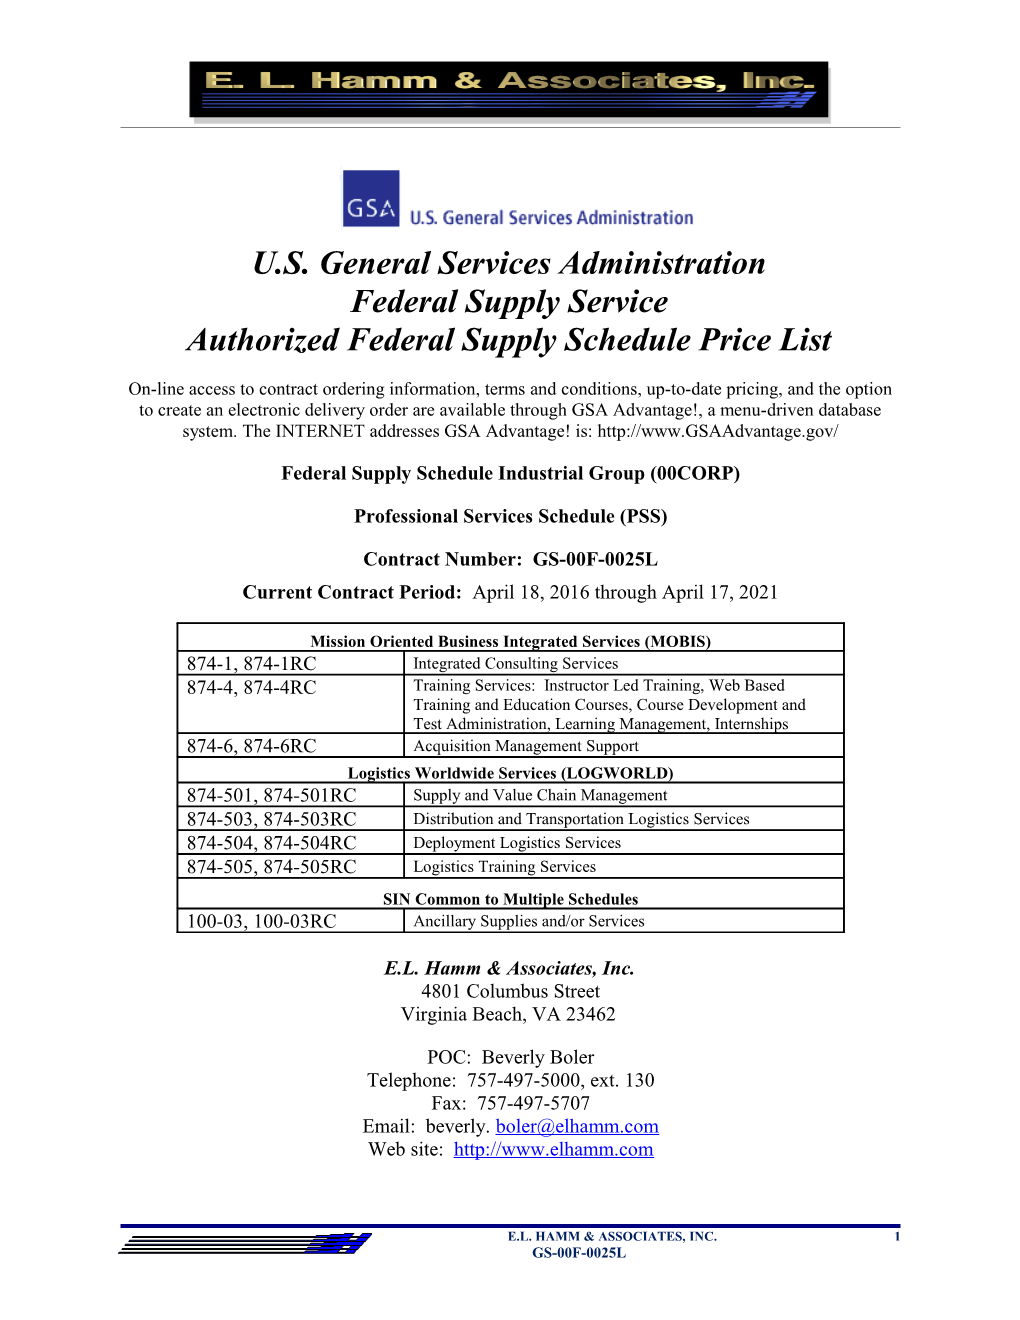 Authorized Federal Supply Schedule Price List s14